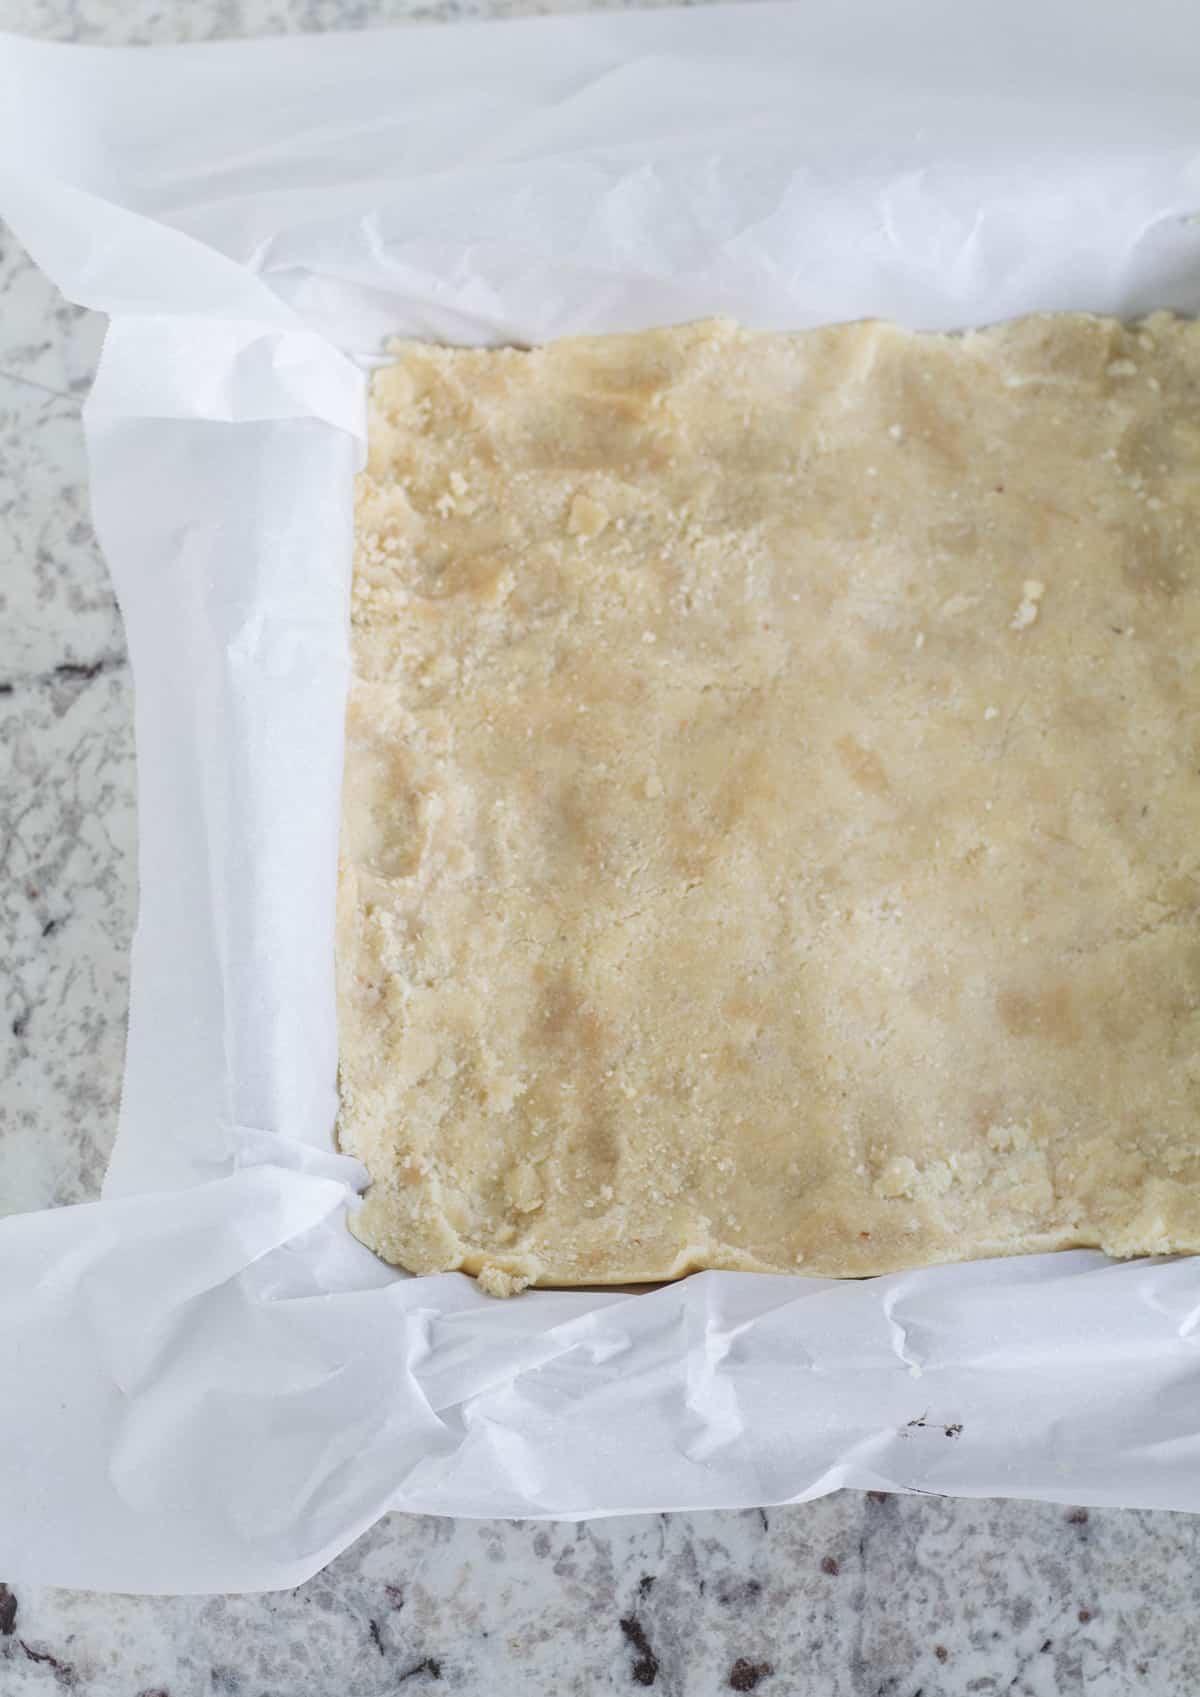 unbaked crust in parchment line baking pan